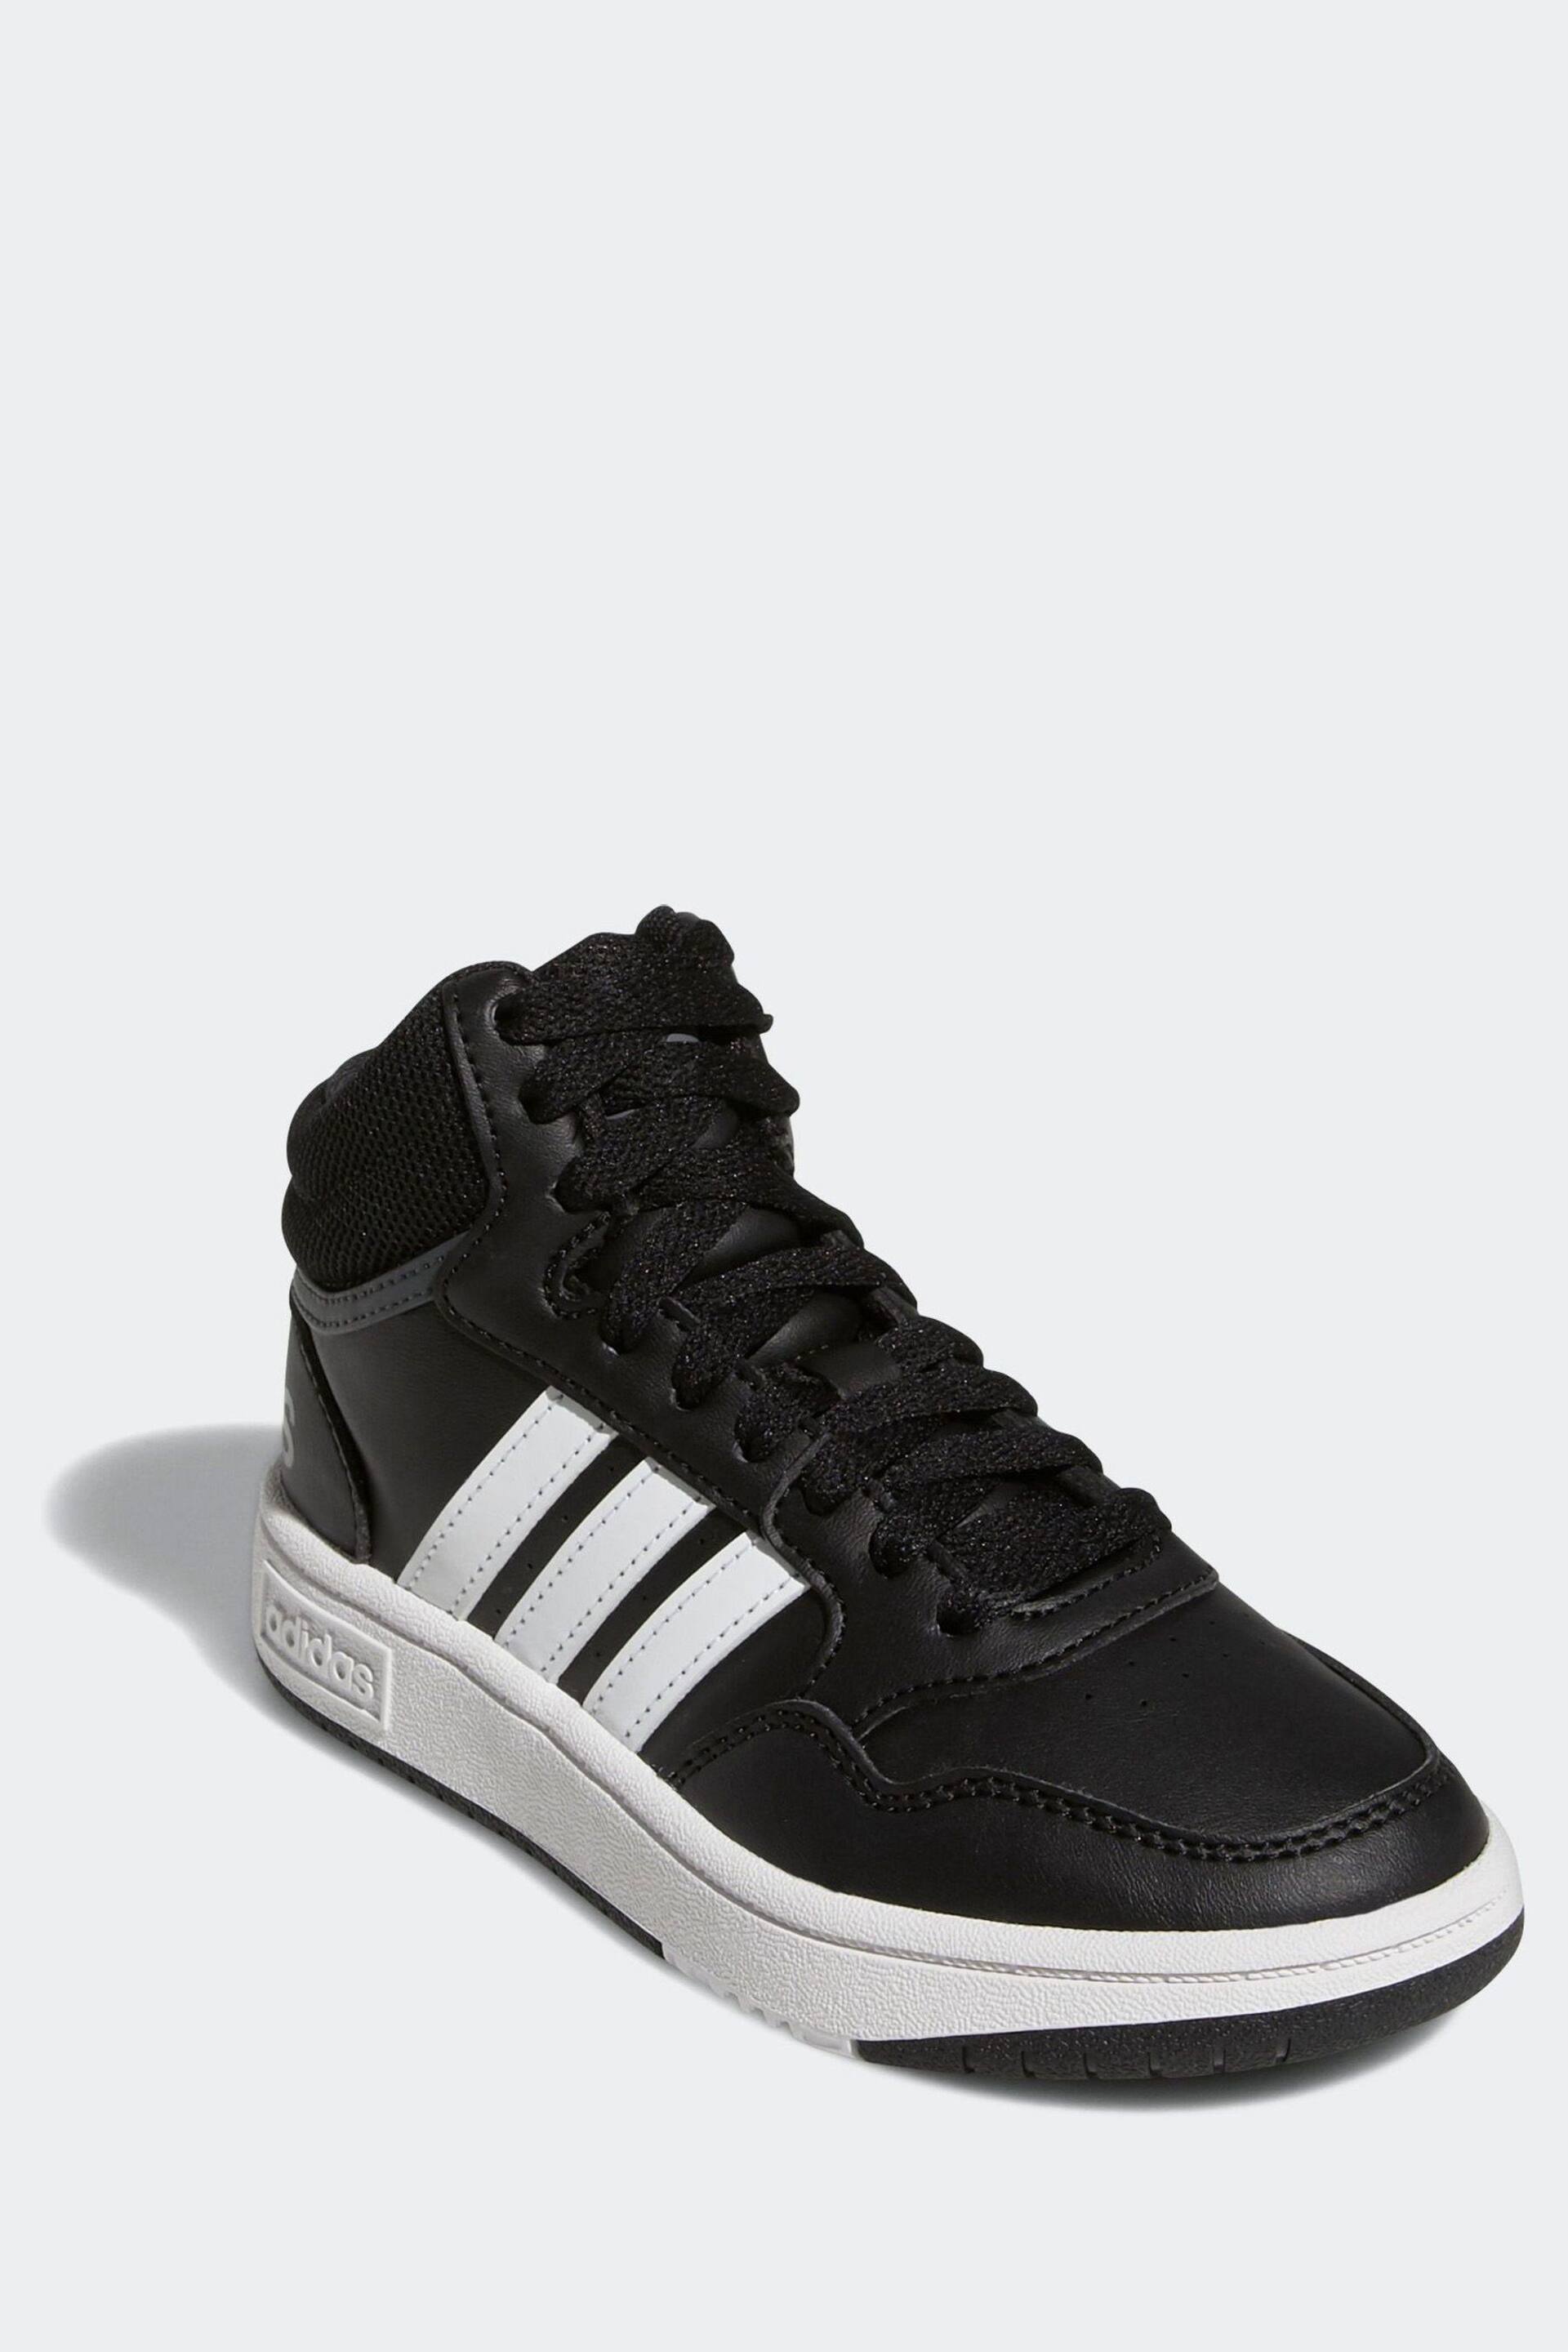 adidas Black/white Hoops Mid Shoes - Image 3 of 9